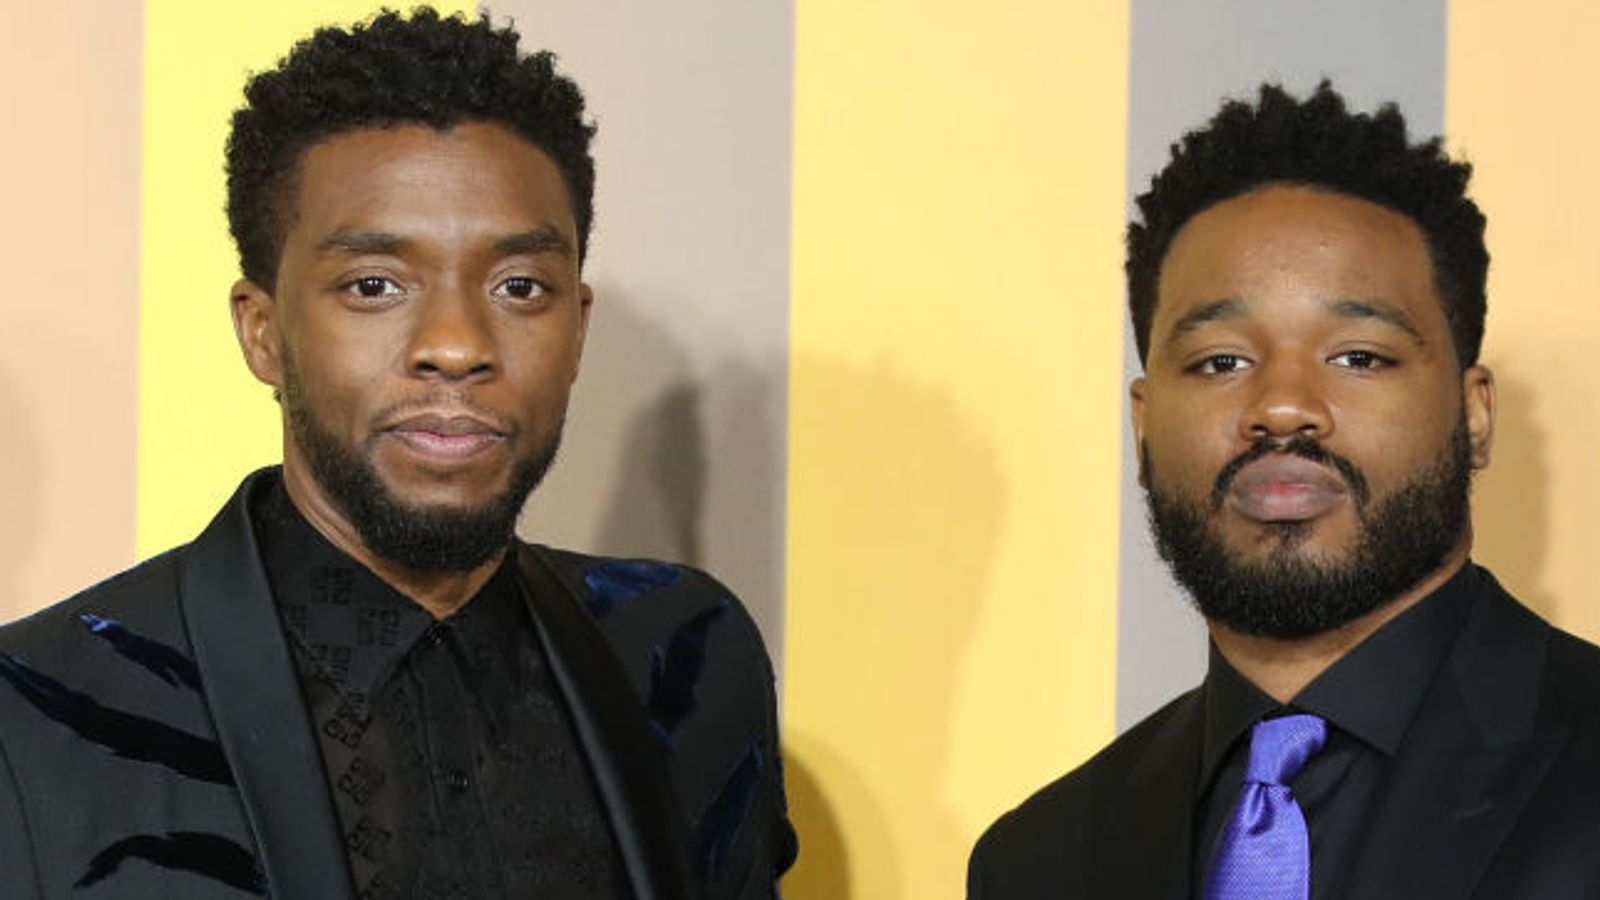 Chadwick Boseman loss of life: Black Panther director claims ‘the ancestors spoke through’ late star | Ents & Arts Information